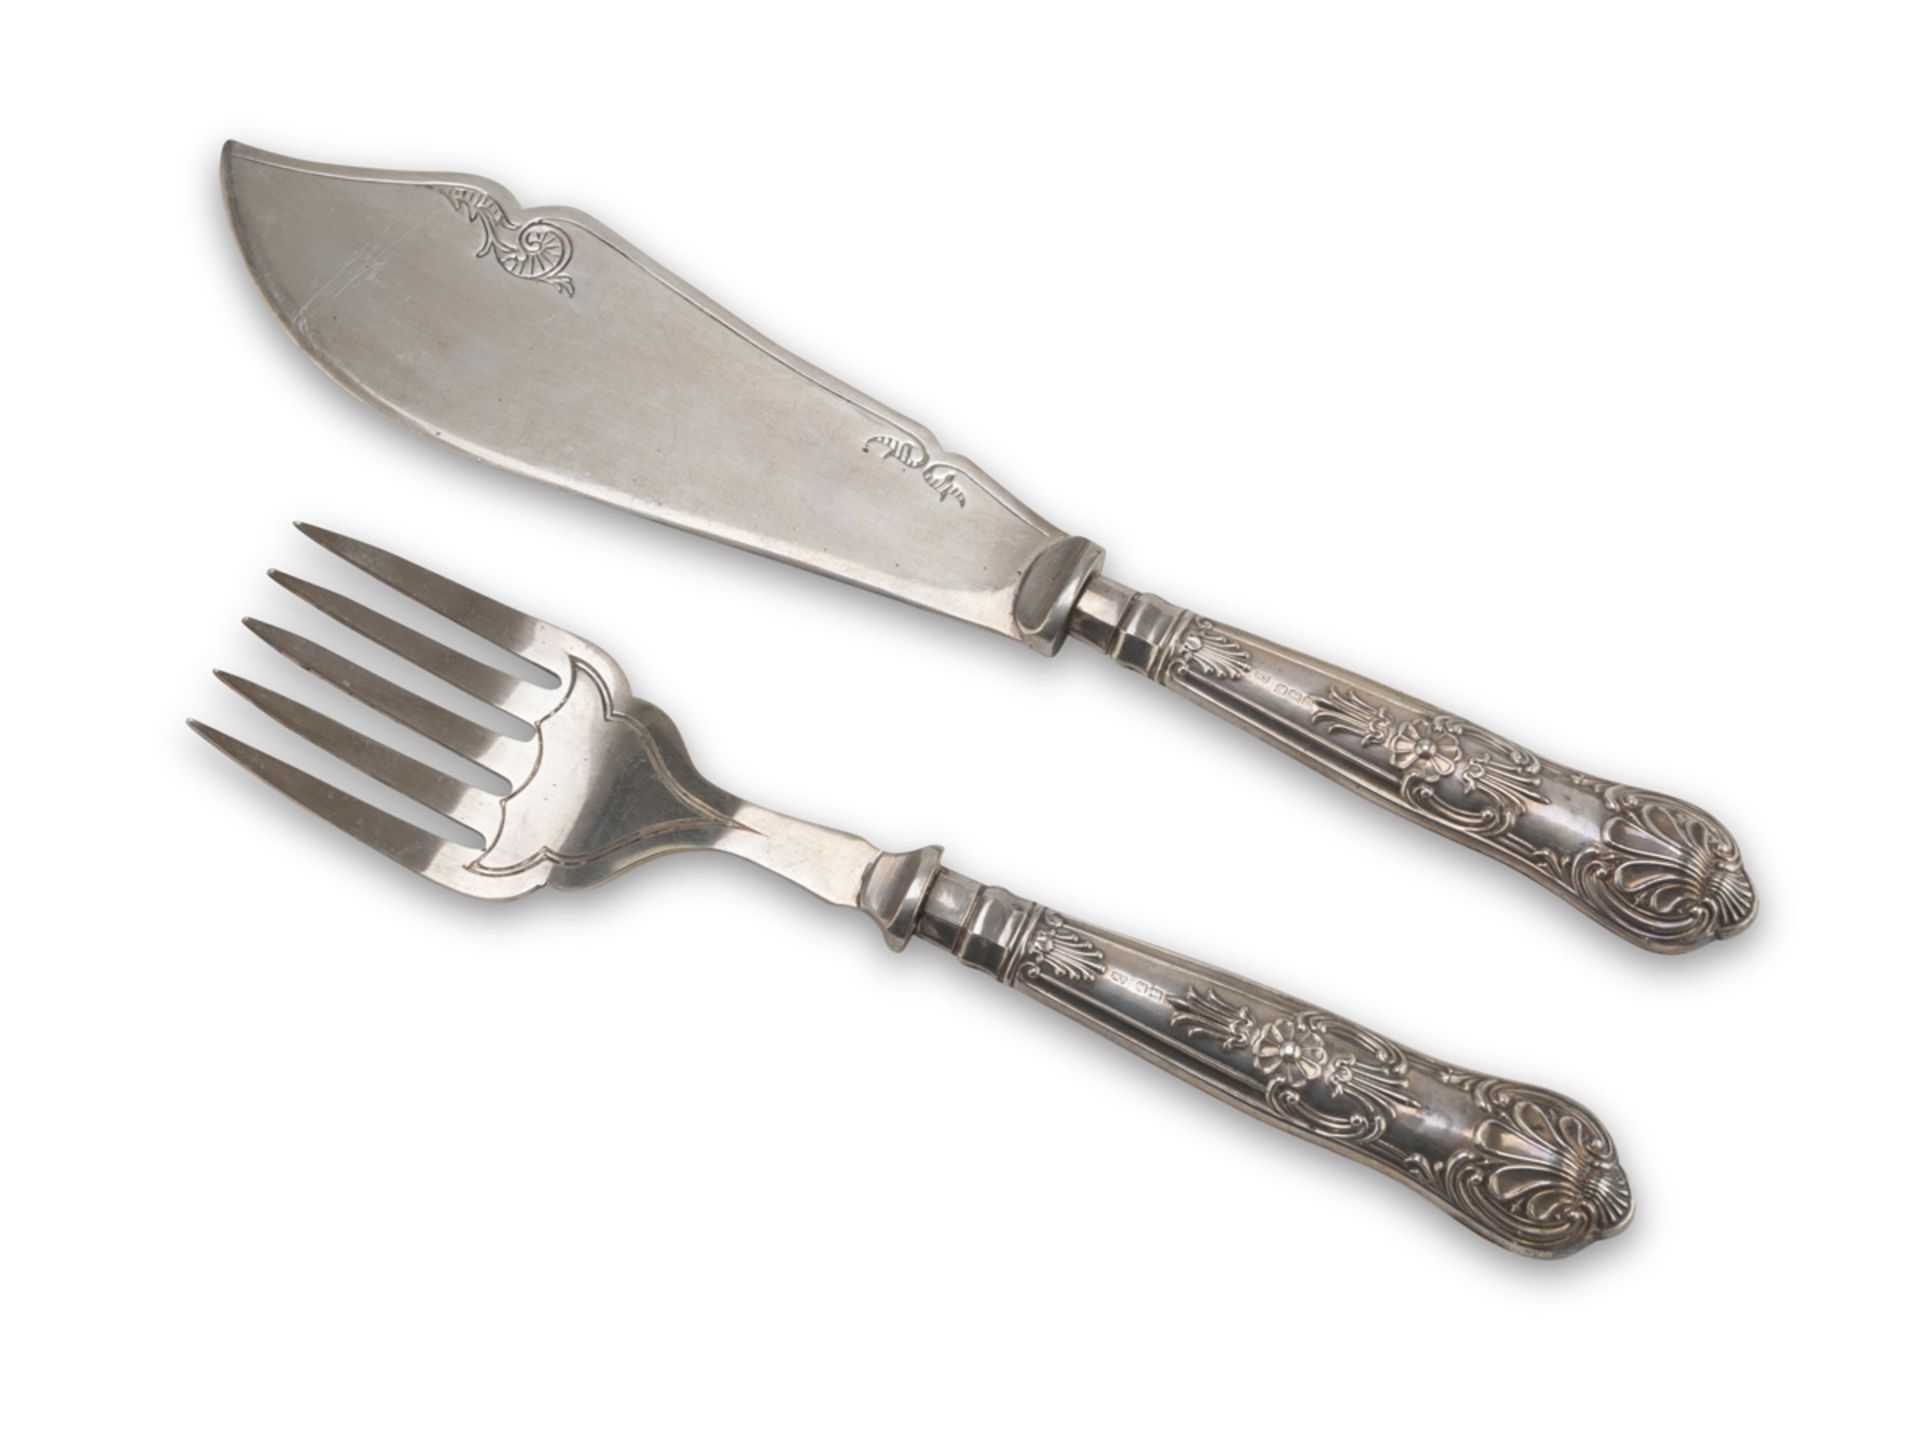 TWO PIECES OF SILVER FISH CUTLERY, PUNCH SHEFFIELD 1929 with silver-plated blades and handles